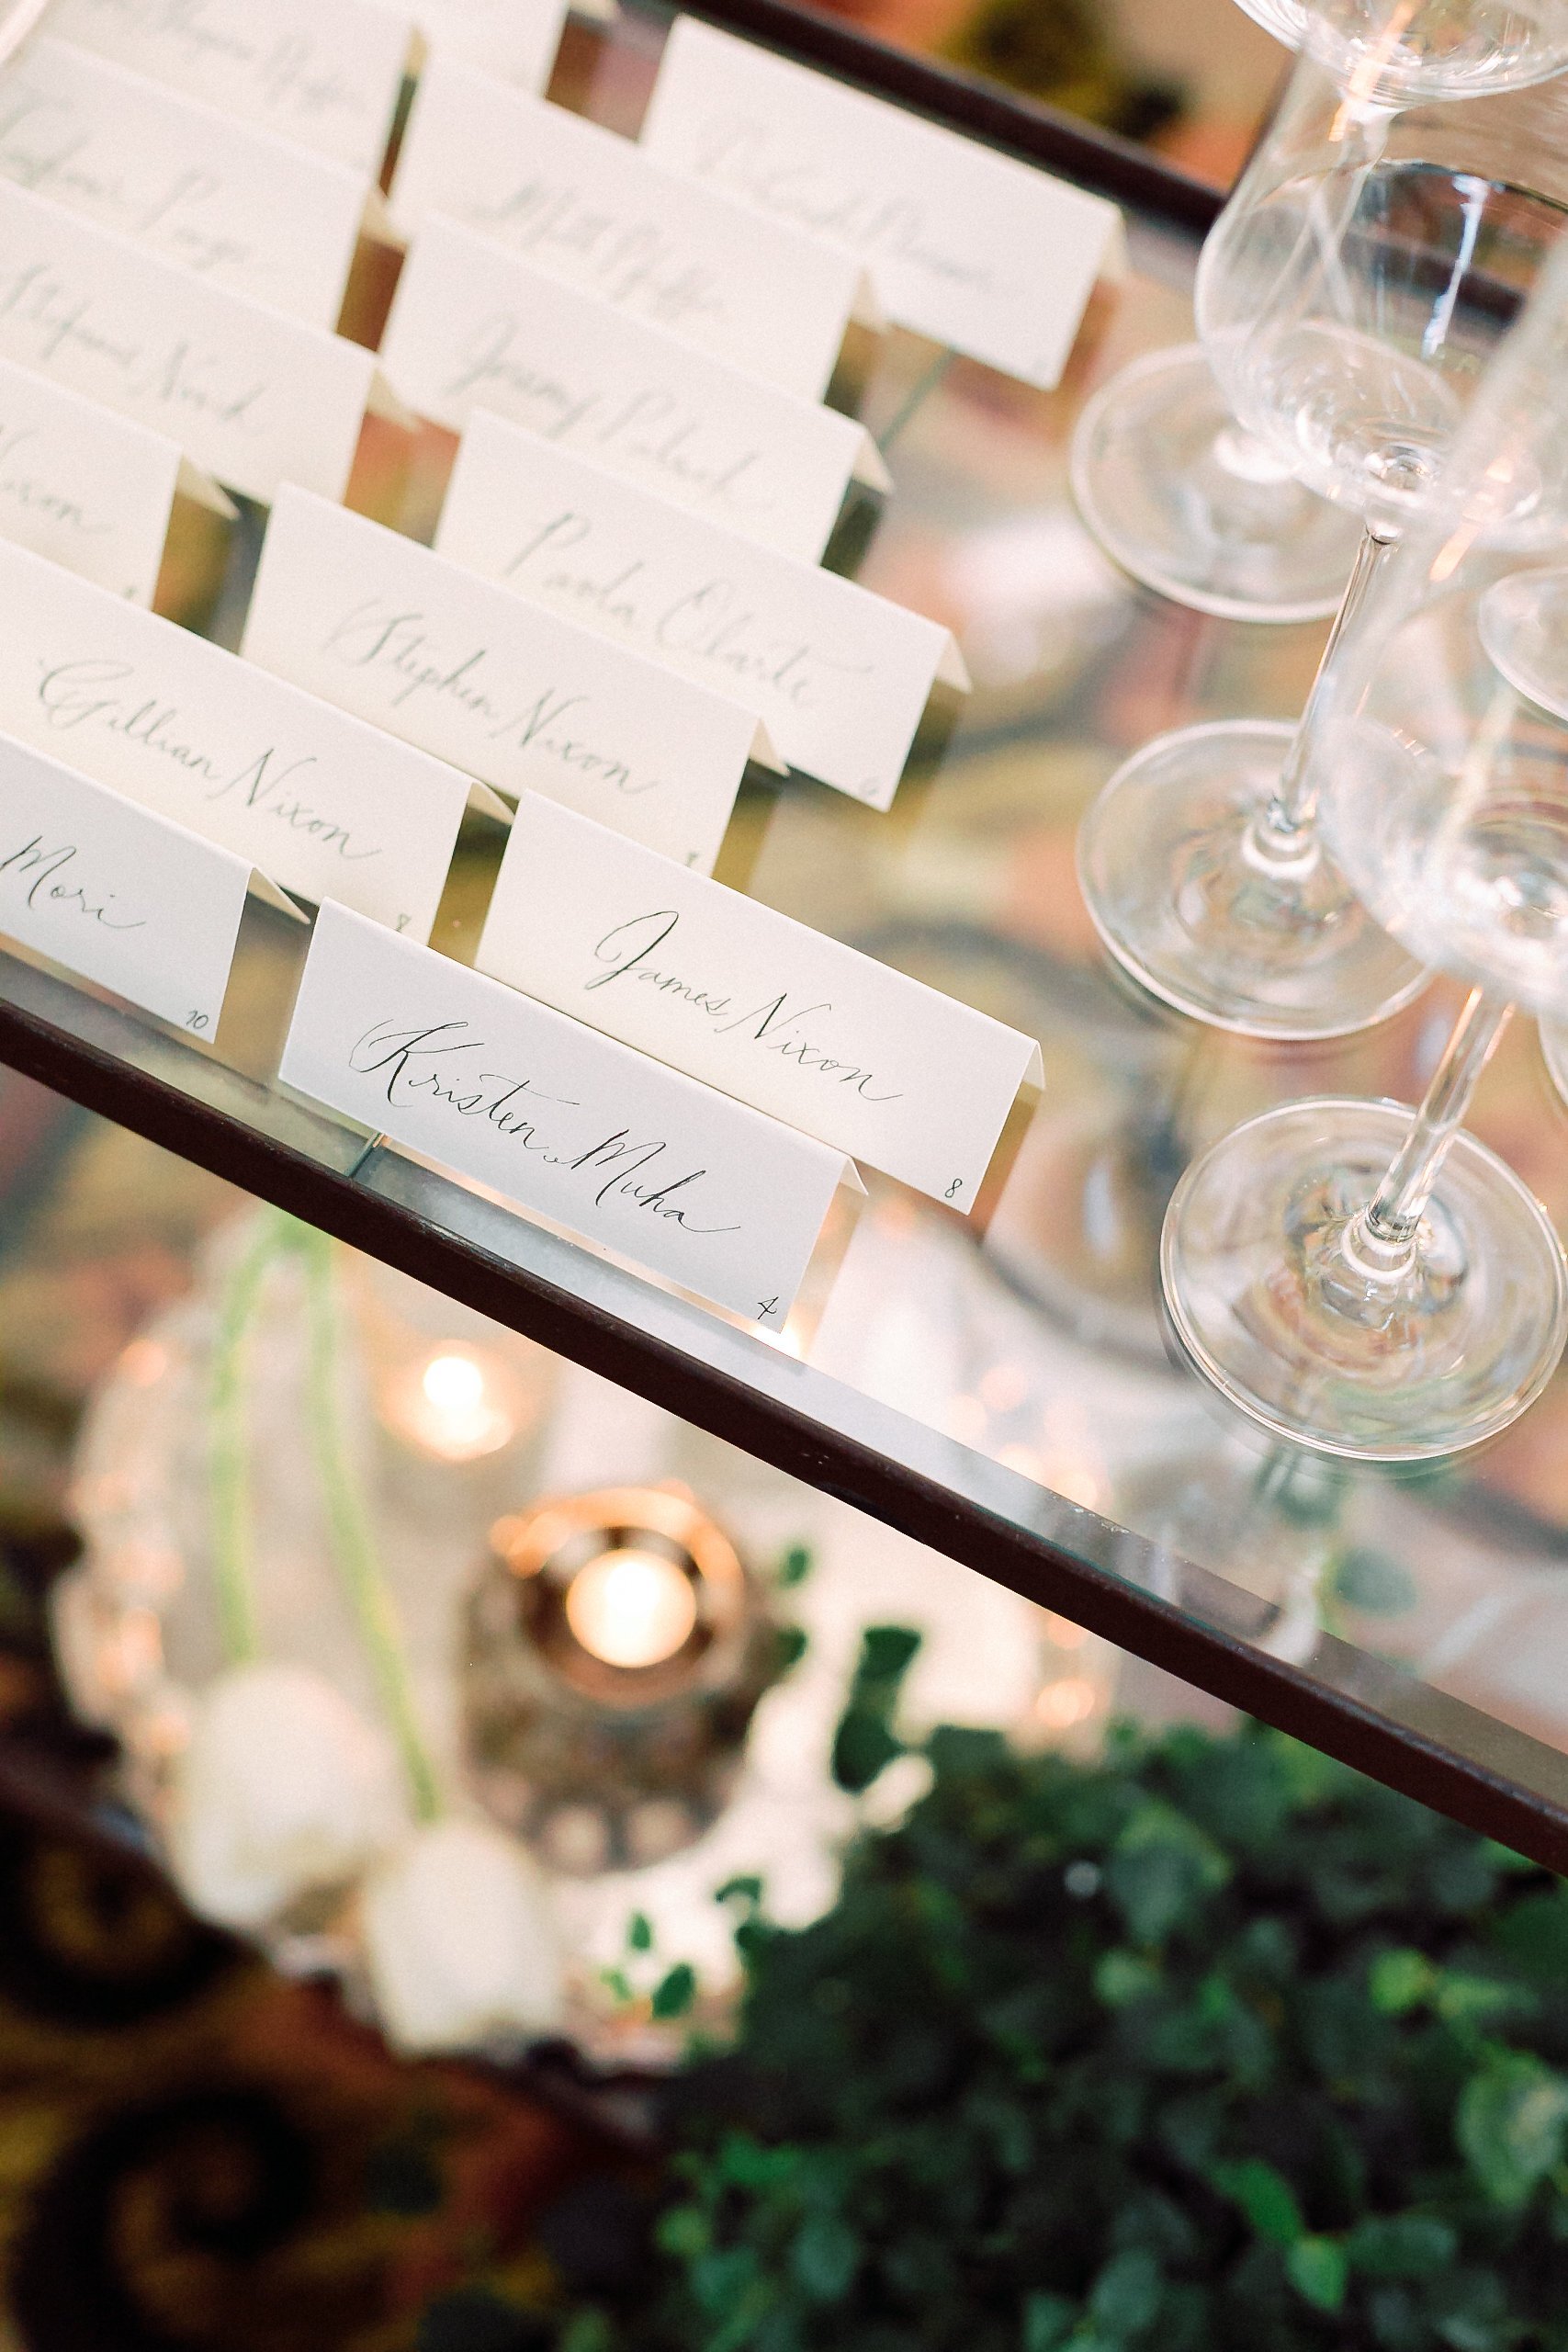 TENTED NAME CARDS